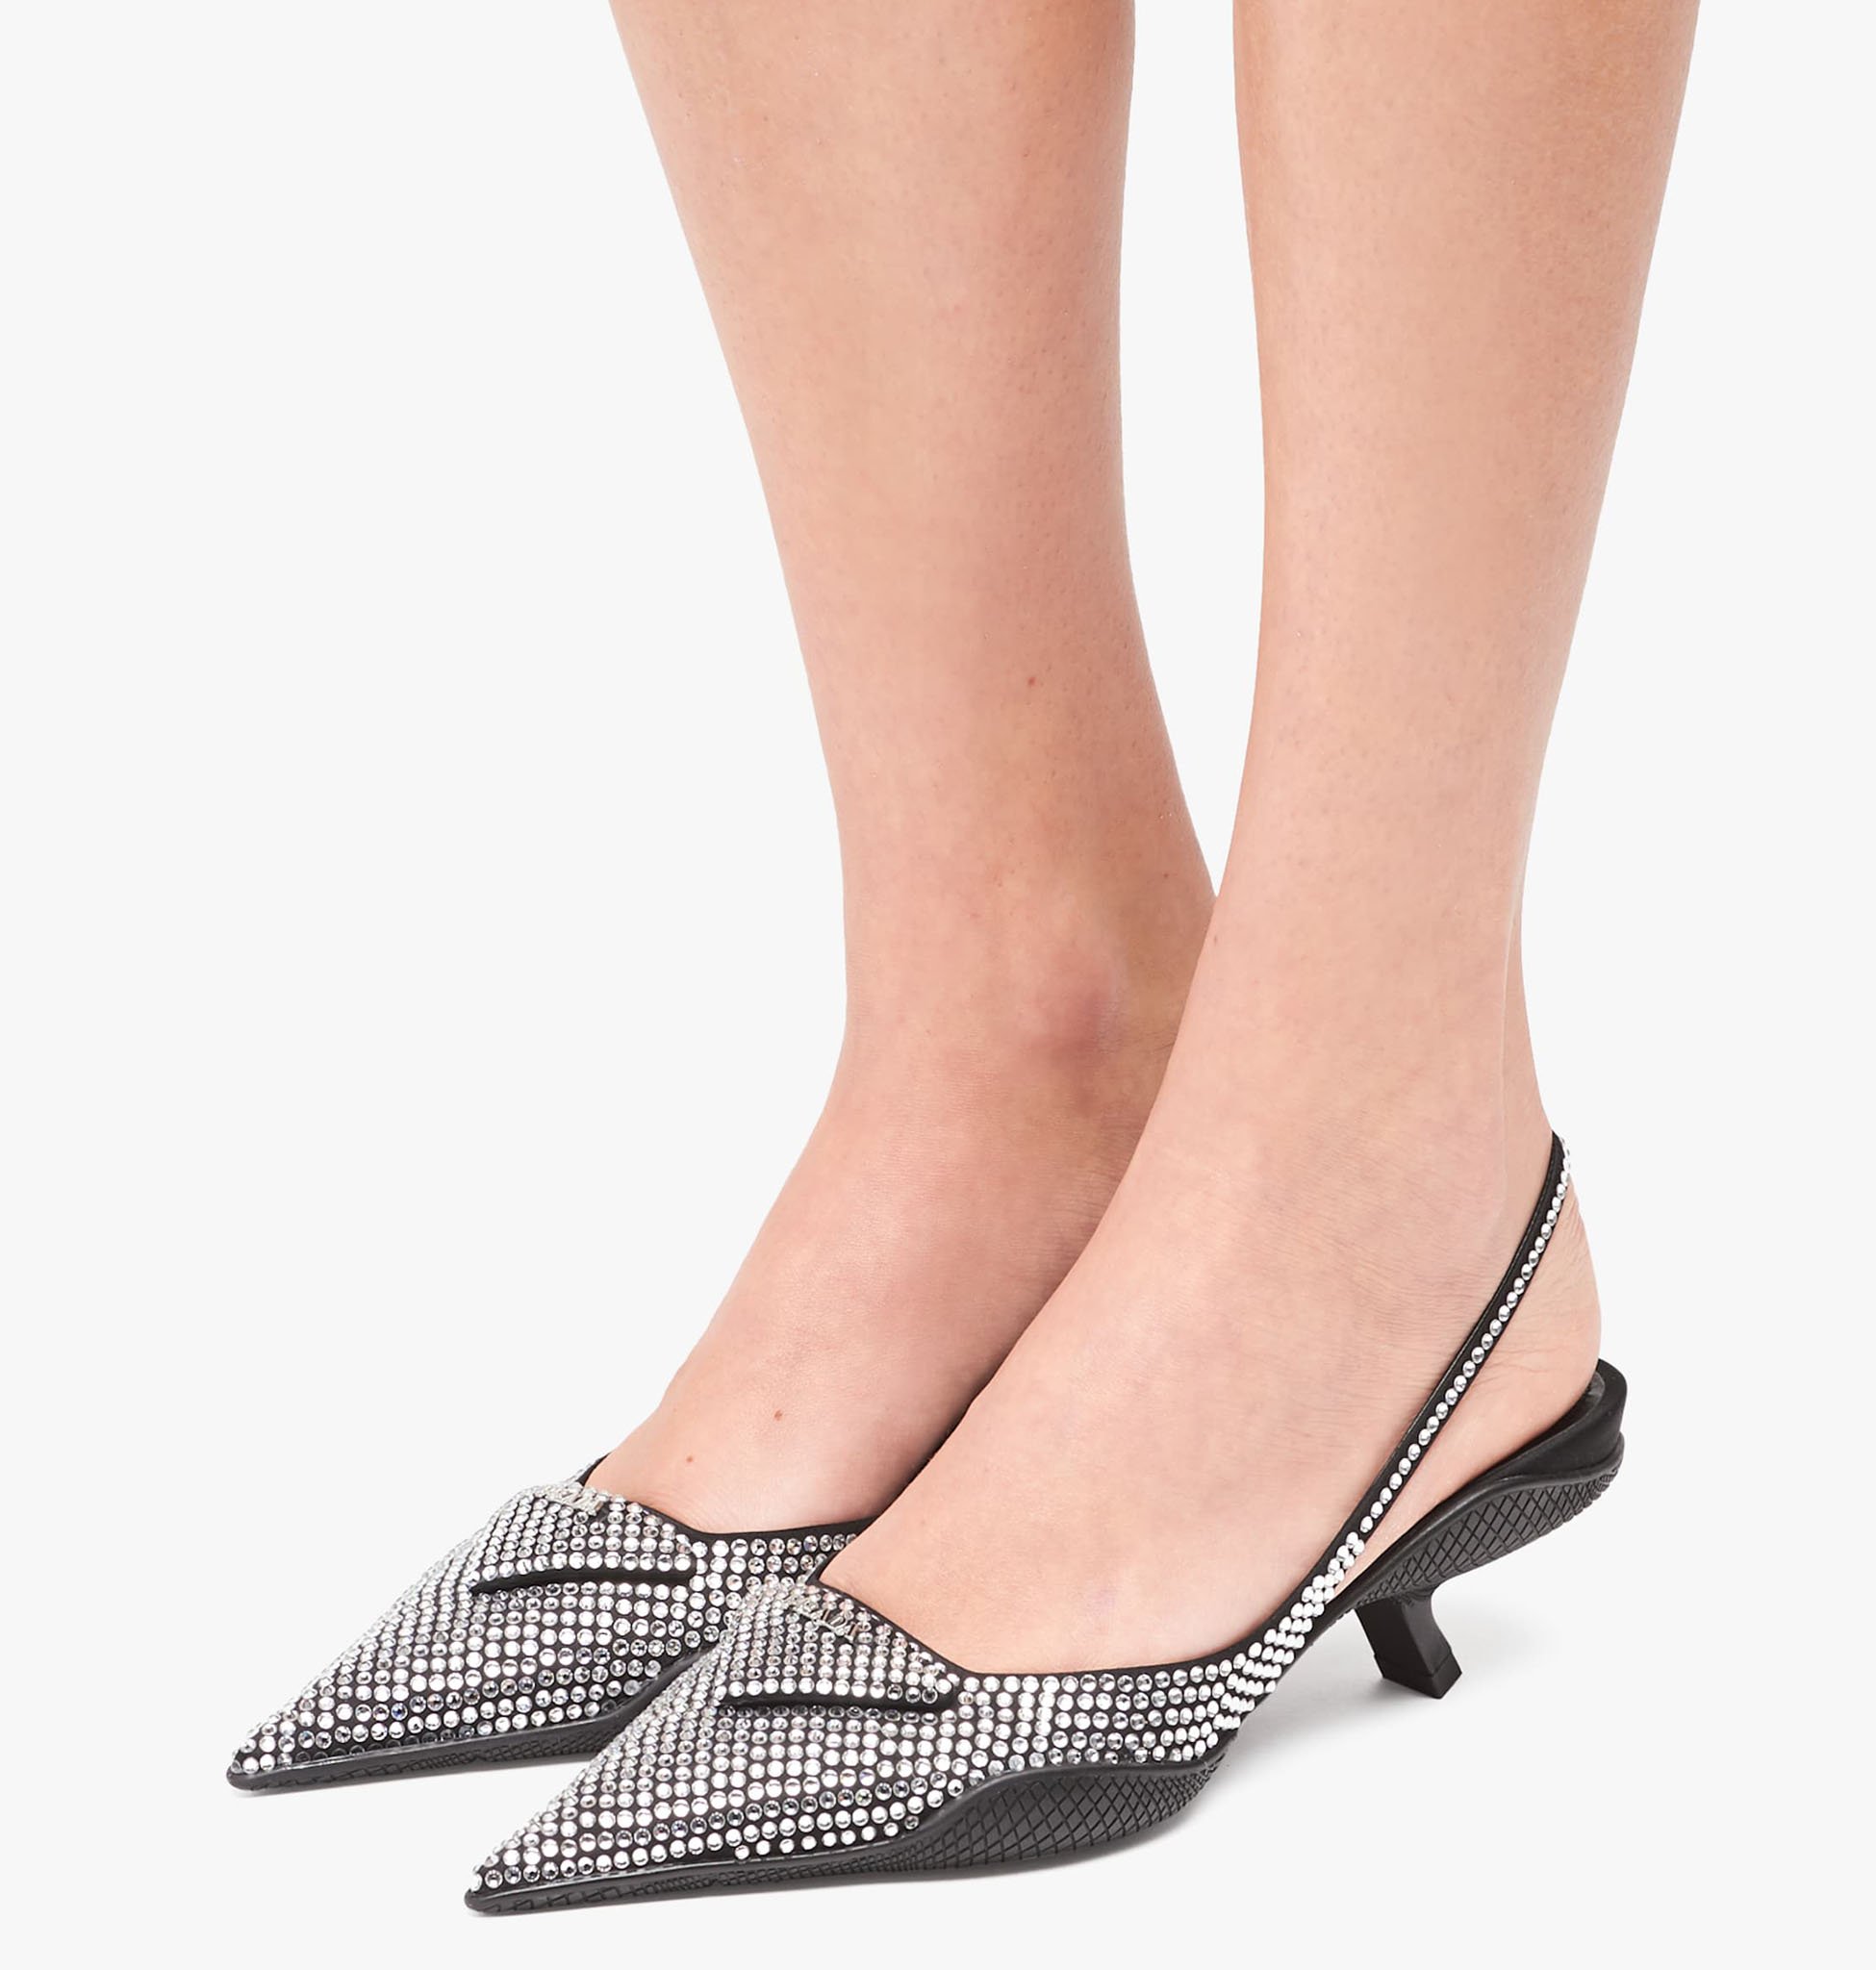 A glimmering modern Cinderella shoe with a comfy comma heel made of rubber shell